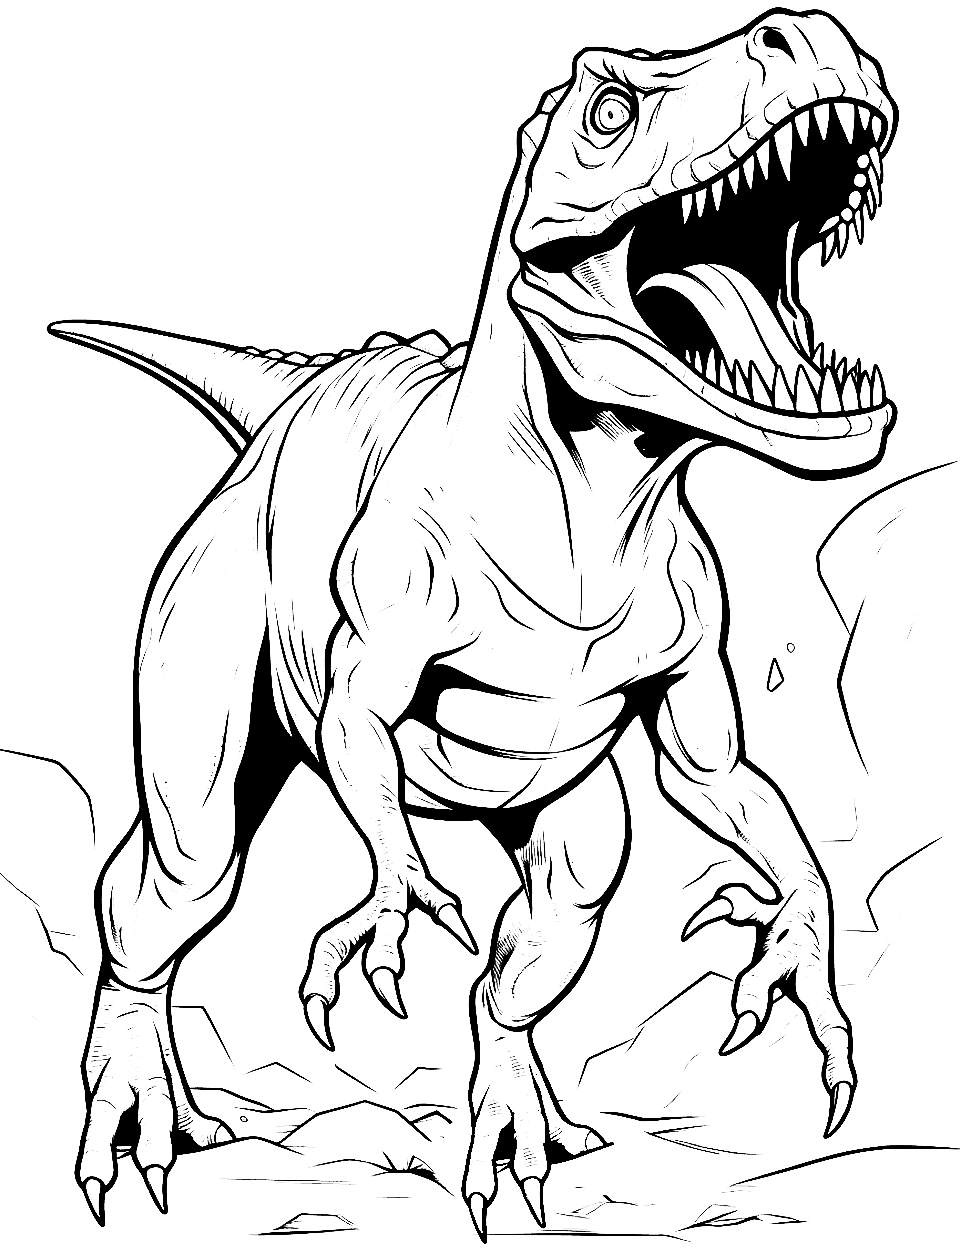 Fierce T-Rex Coloring Page - An intimidating pose of the hybrid, T-Rex.